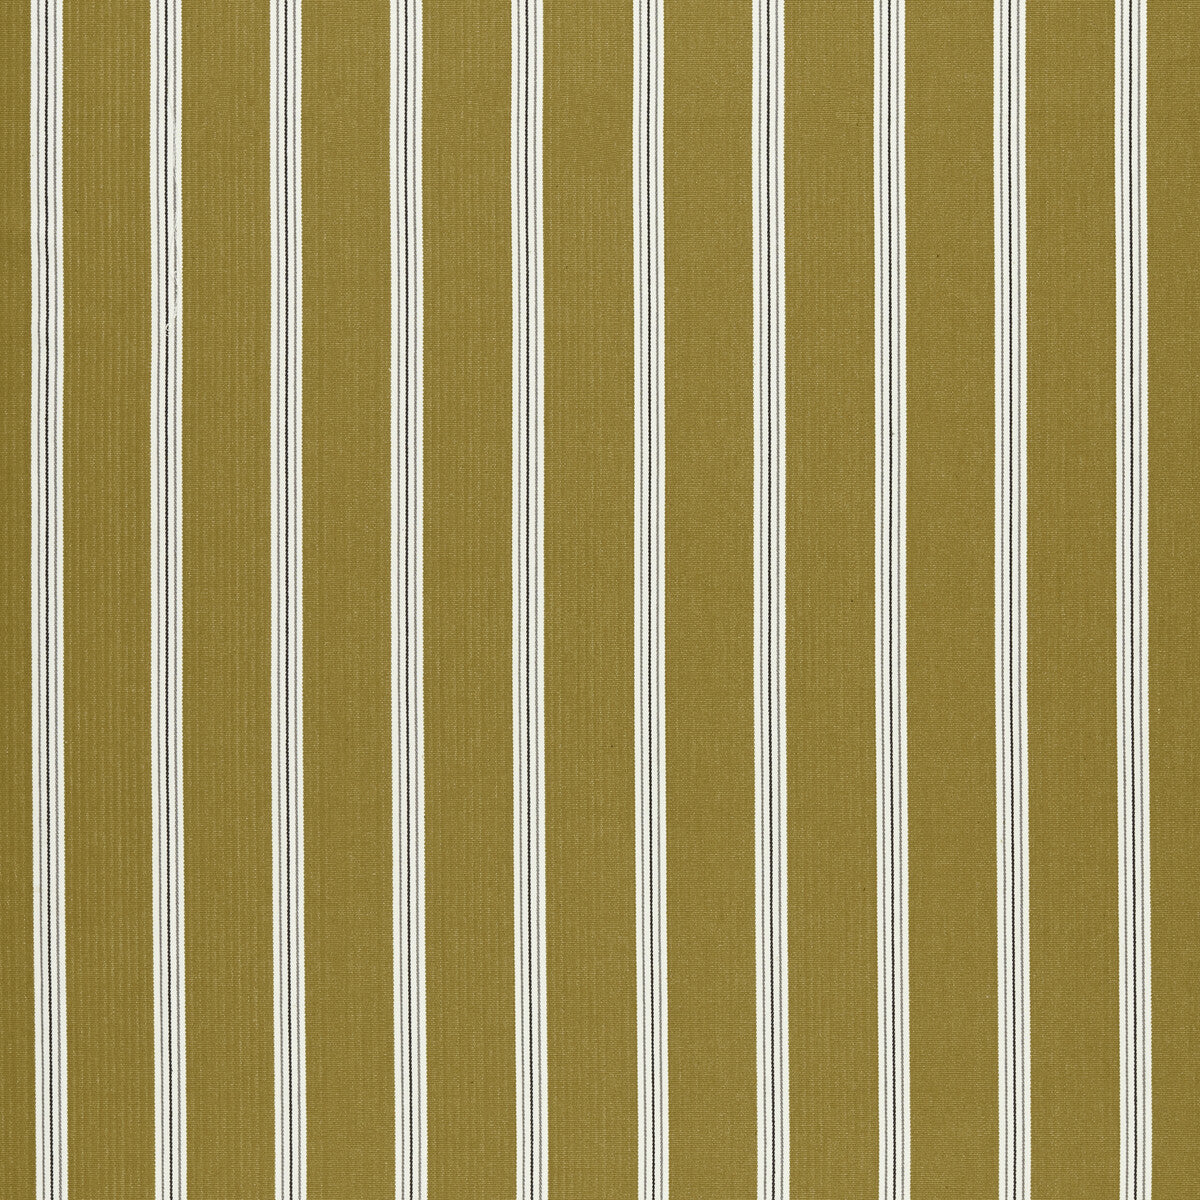 Knightsbridge fabric in ochre/charcoal color - pattern F1500/04.CAC.0 - by Clarke And Clarke in the Clarke &amp; Clarke Edgeworth collection